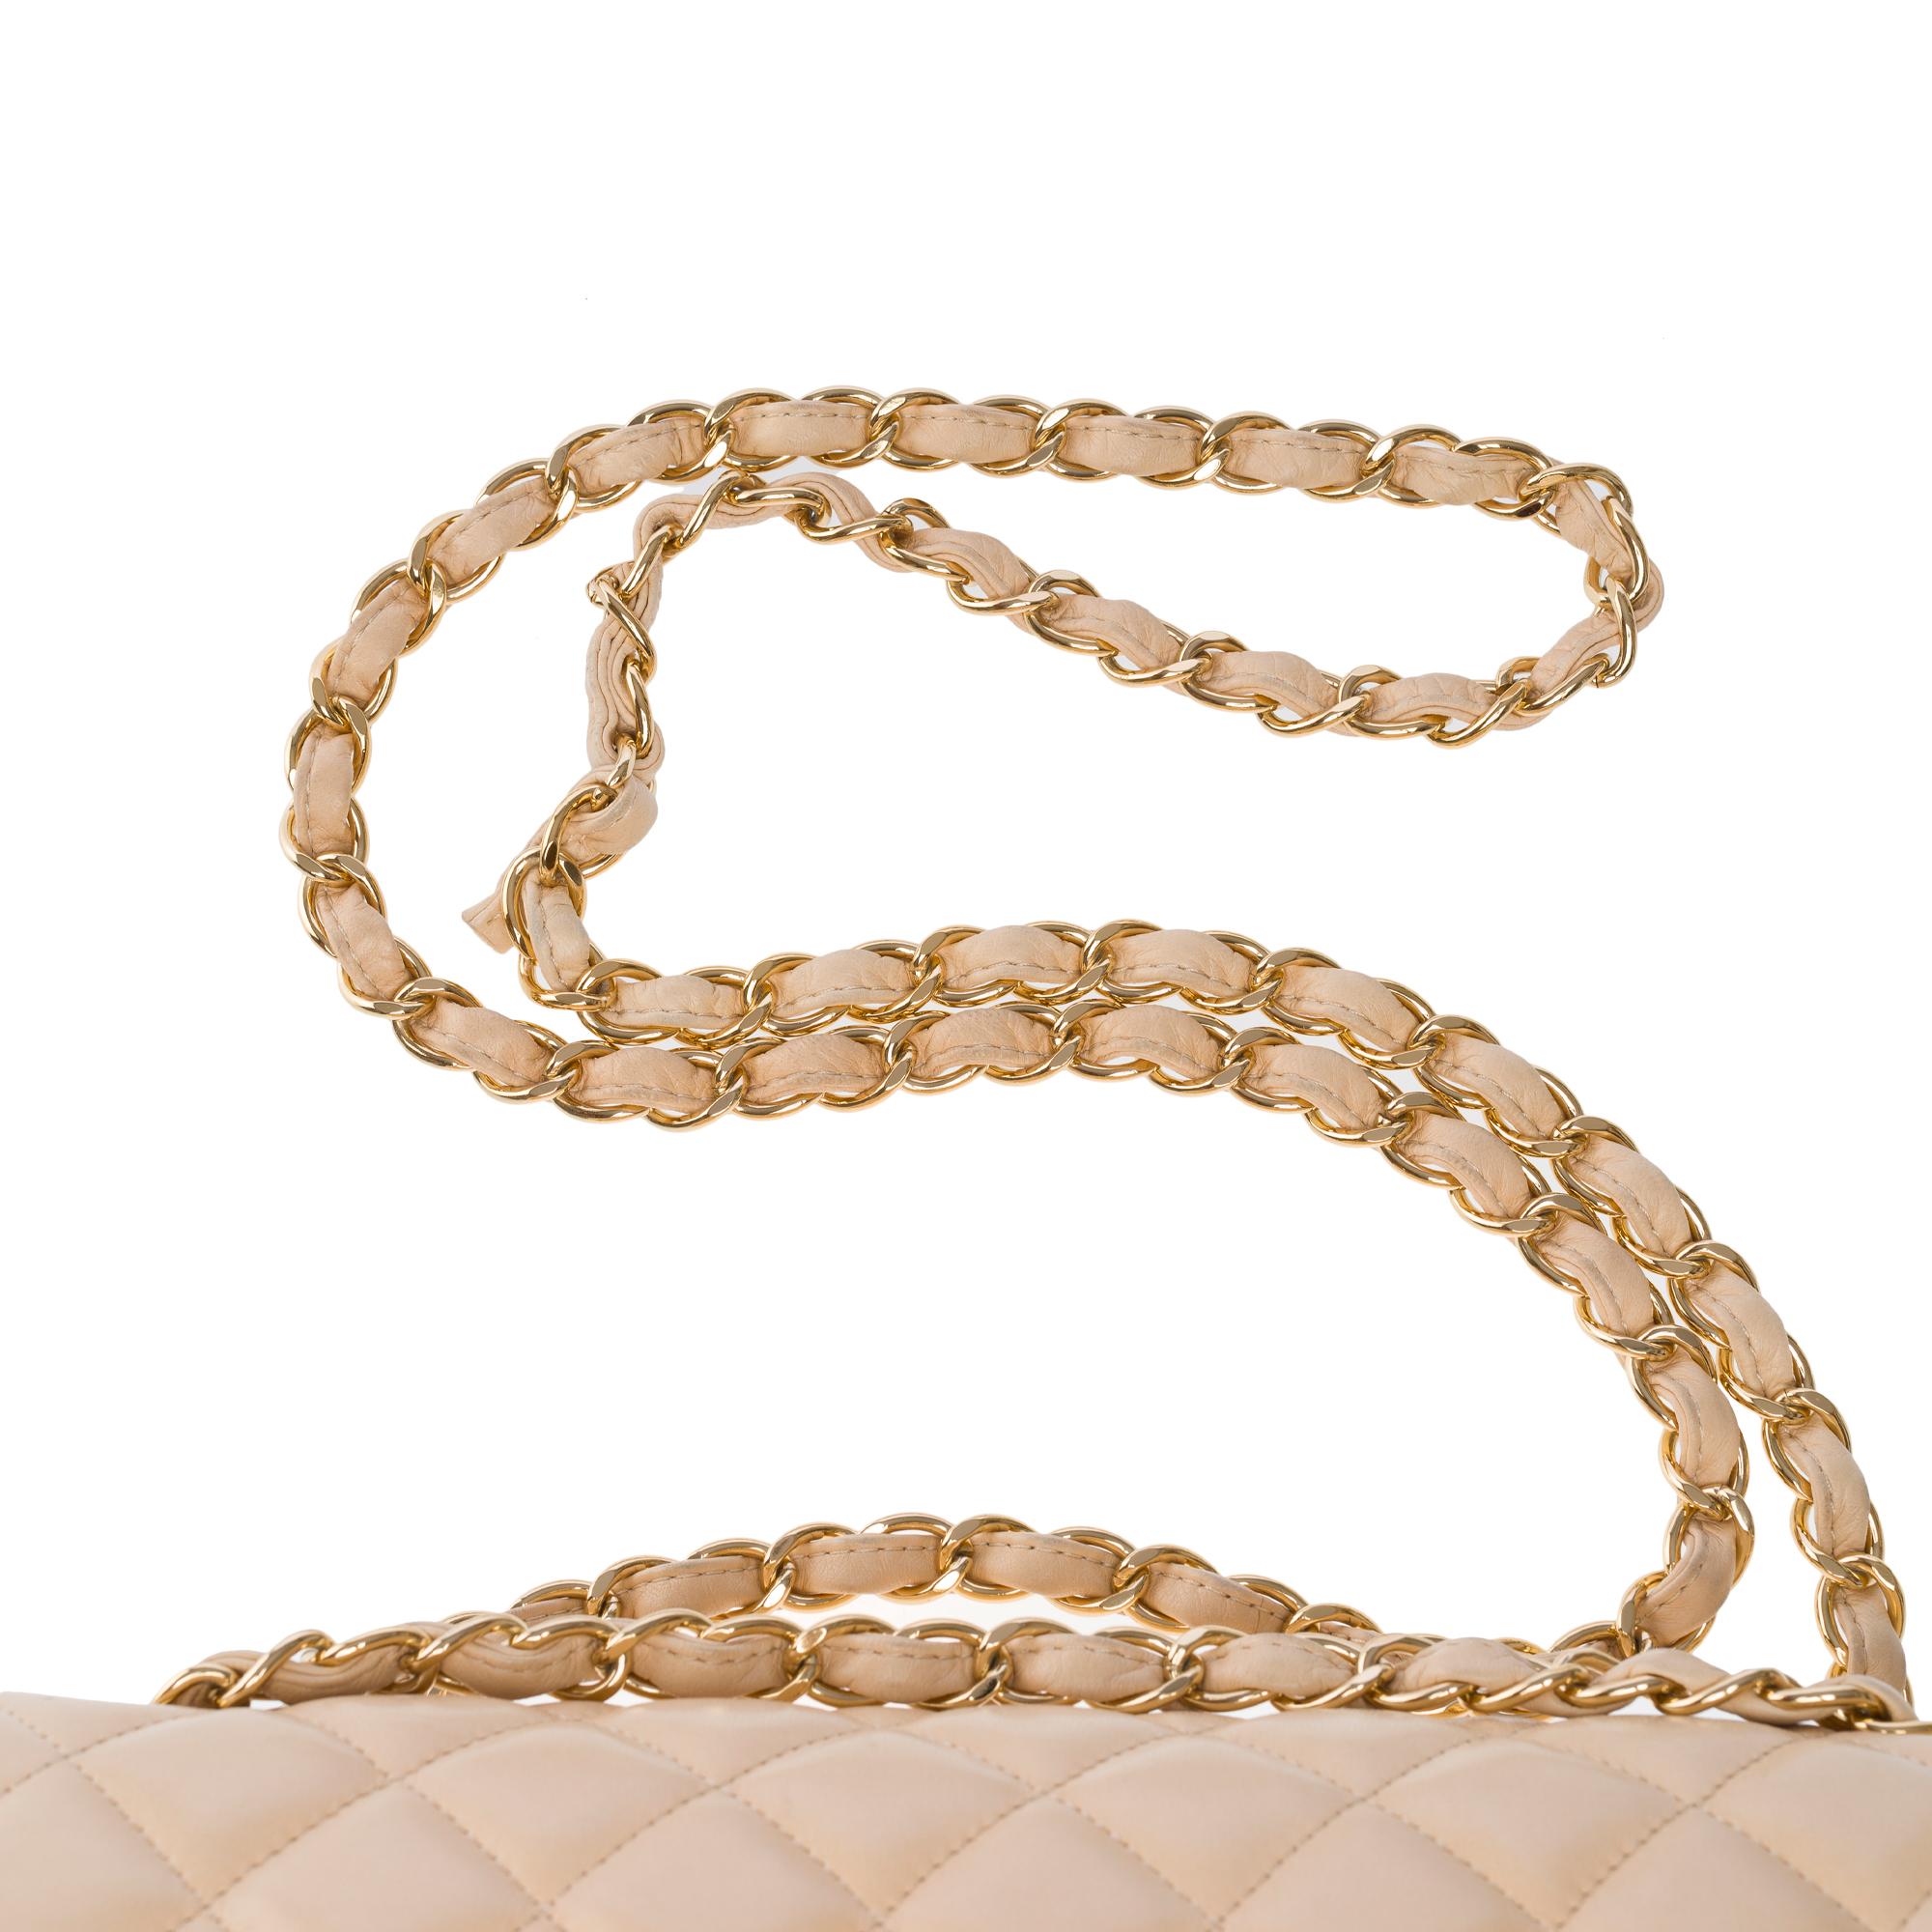 Chanel Timeless Jumbo double flap shoulder bag in beige quilted lambskin, GHW 6